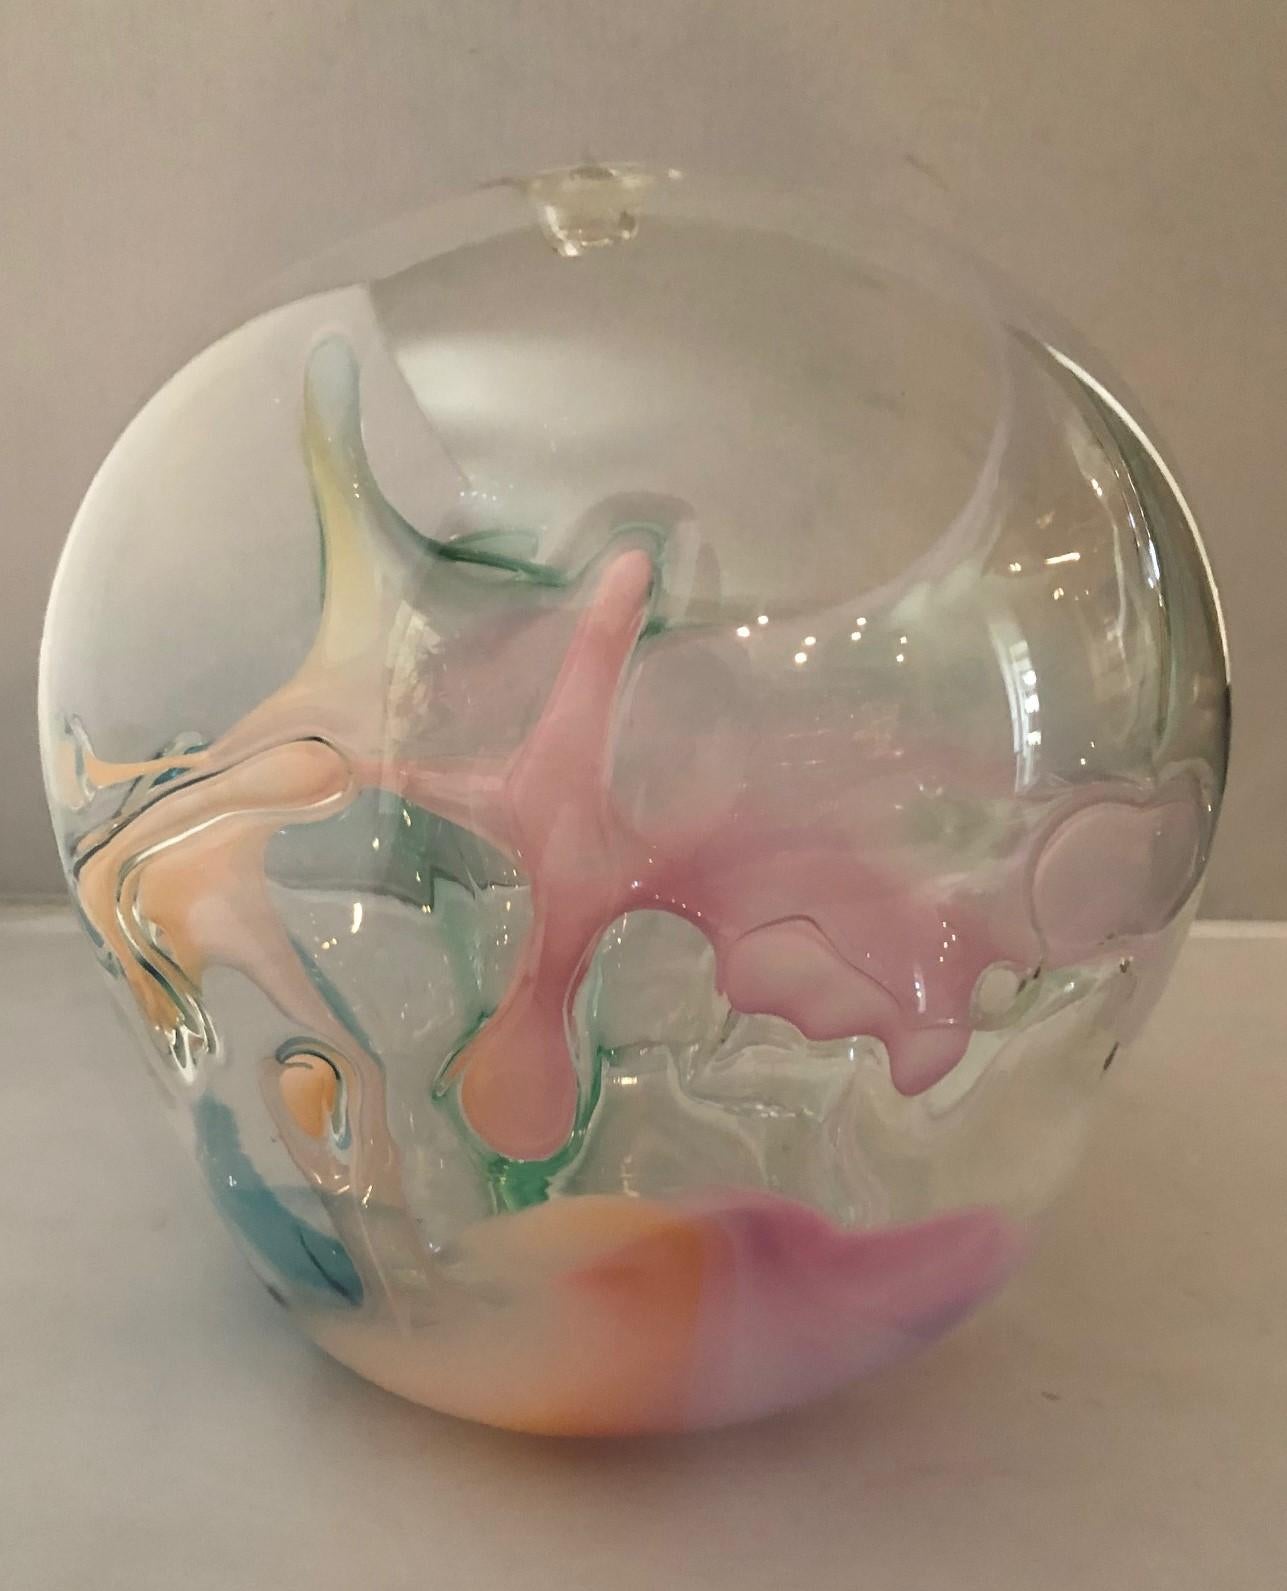 Large multicolored art glass orb sculpture by Peter Bramhall, circa 1983. This hand blown glass orb sculpture has internal glass threads of pink, white and green. The piece is approximately 10